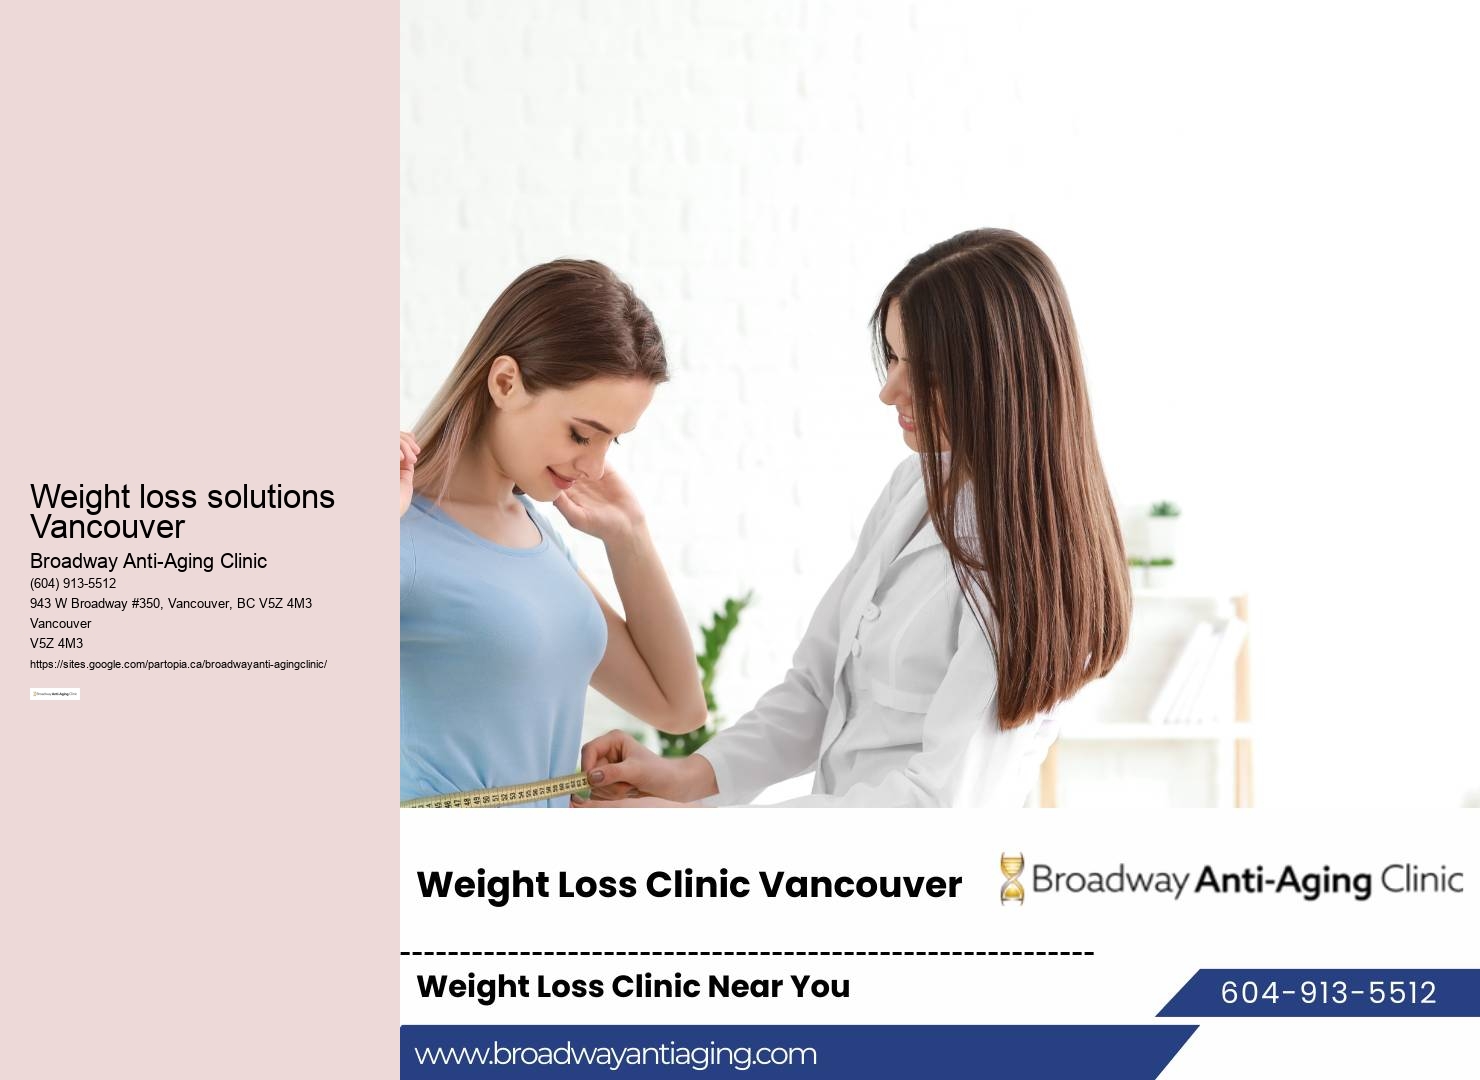 Weight loss solutions Vancouver